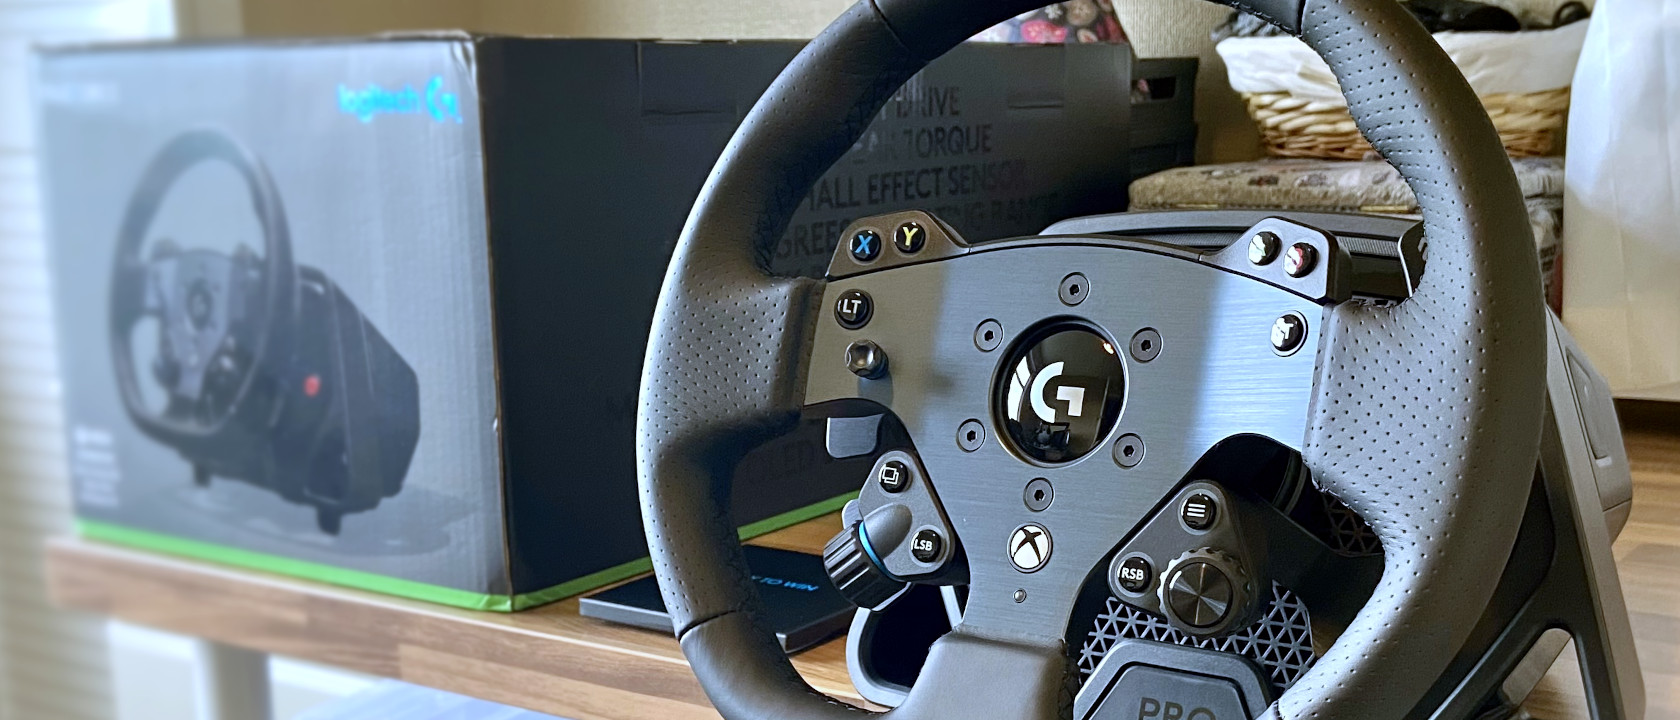 I've recently bought the Axc Sim True Brake mod for my G29 and was keen to  know what difference it was actually going to make so i did a before after  comparison